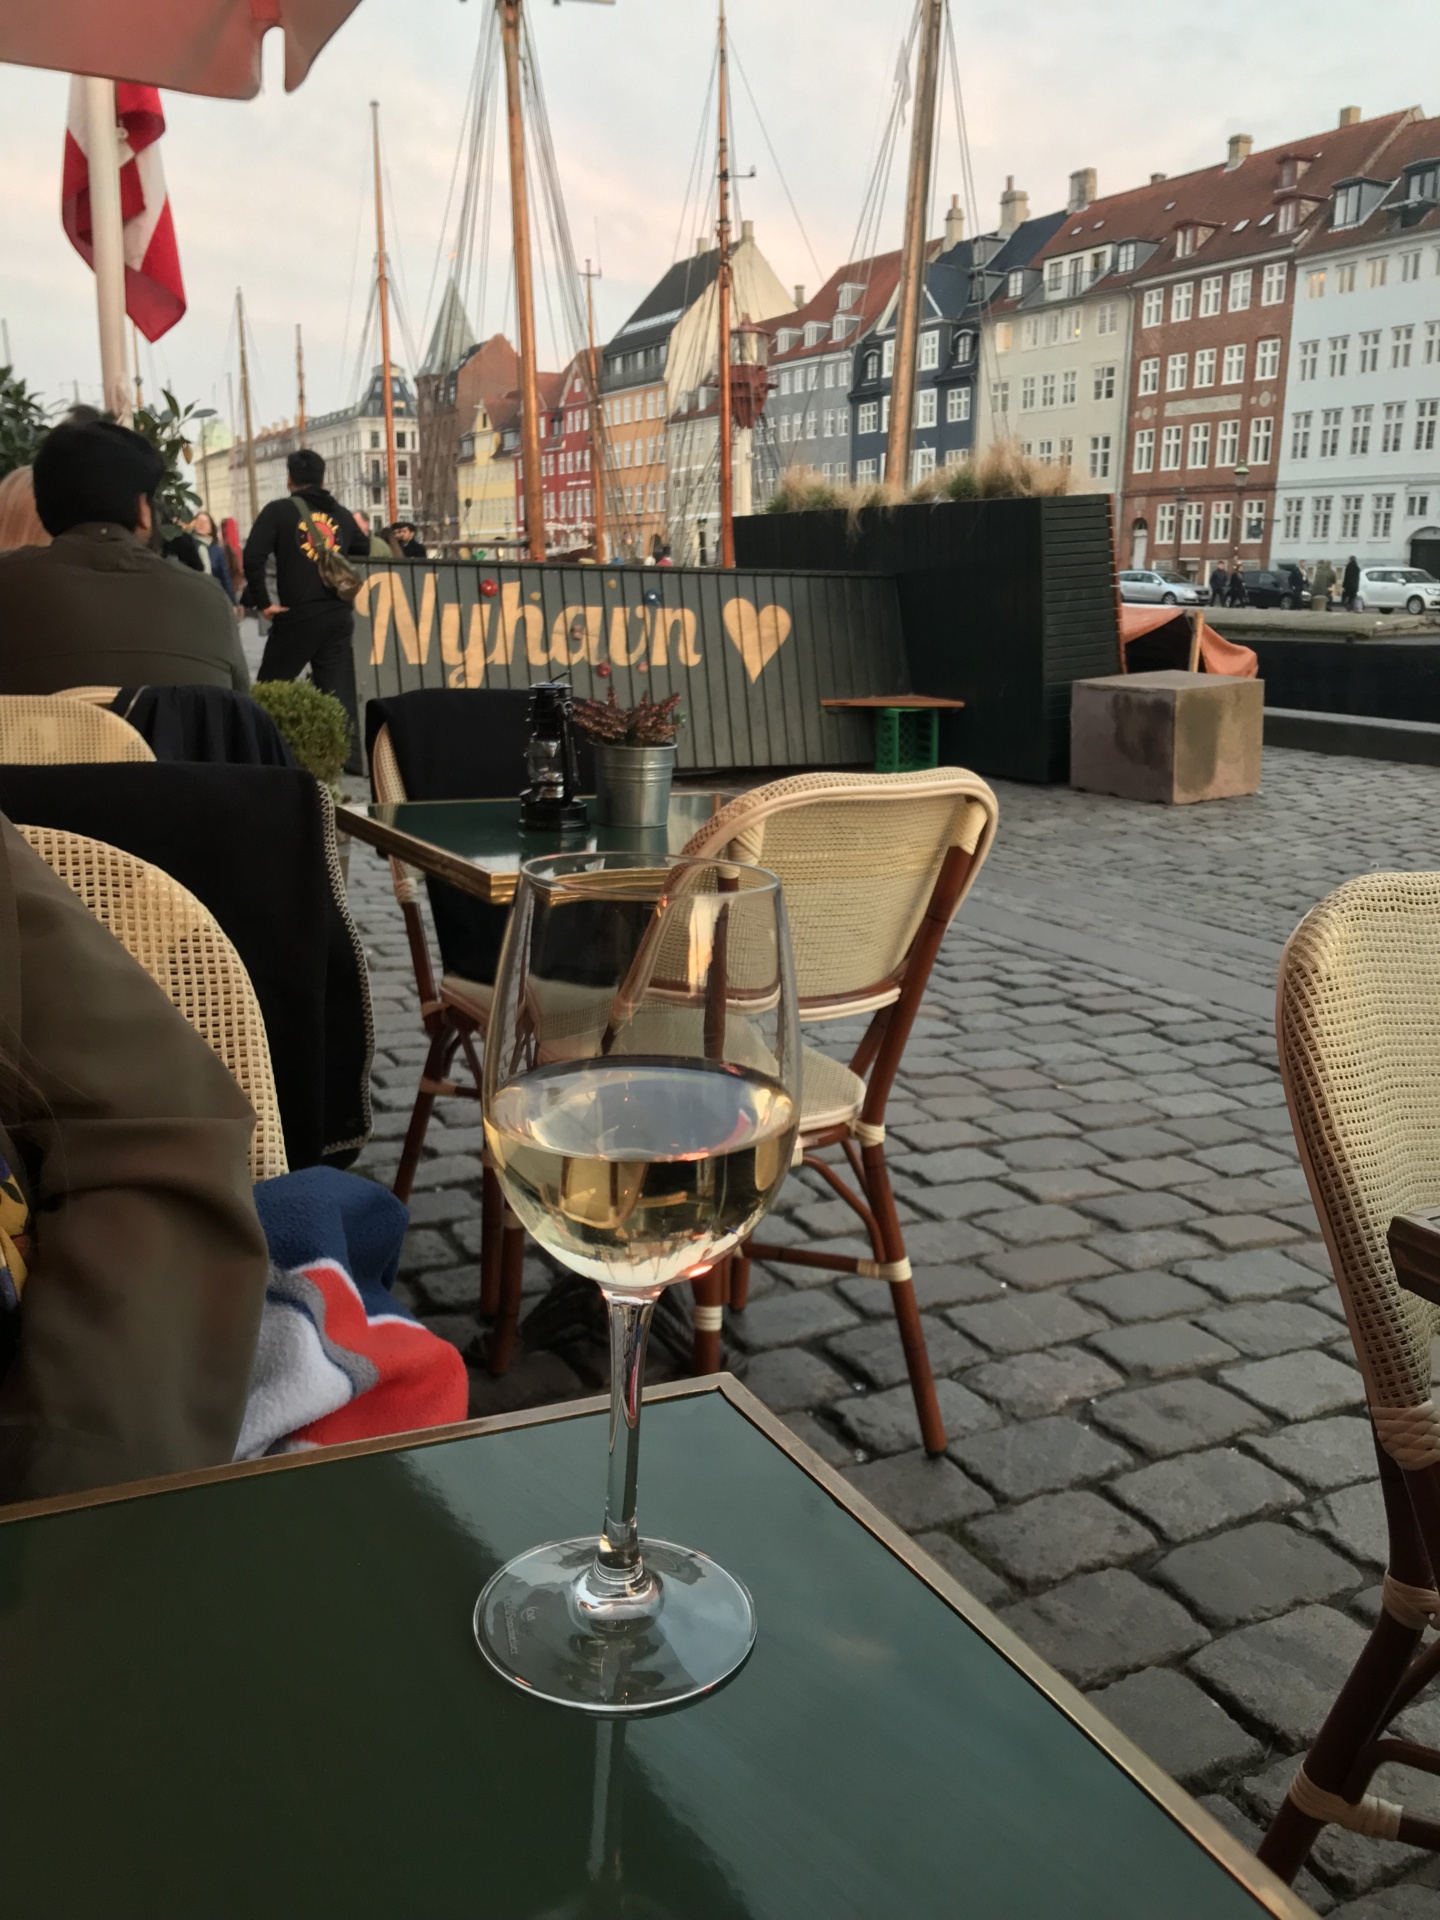 During our time in Copenhagen we found some cute places for a drink..